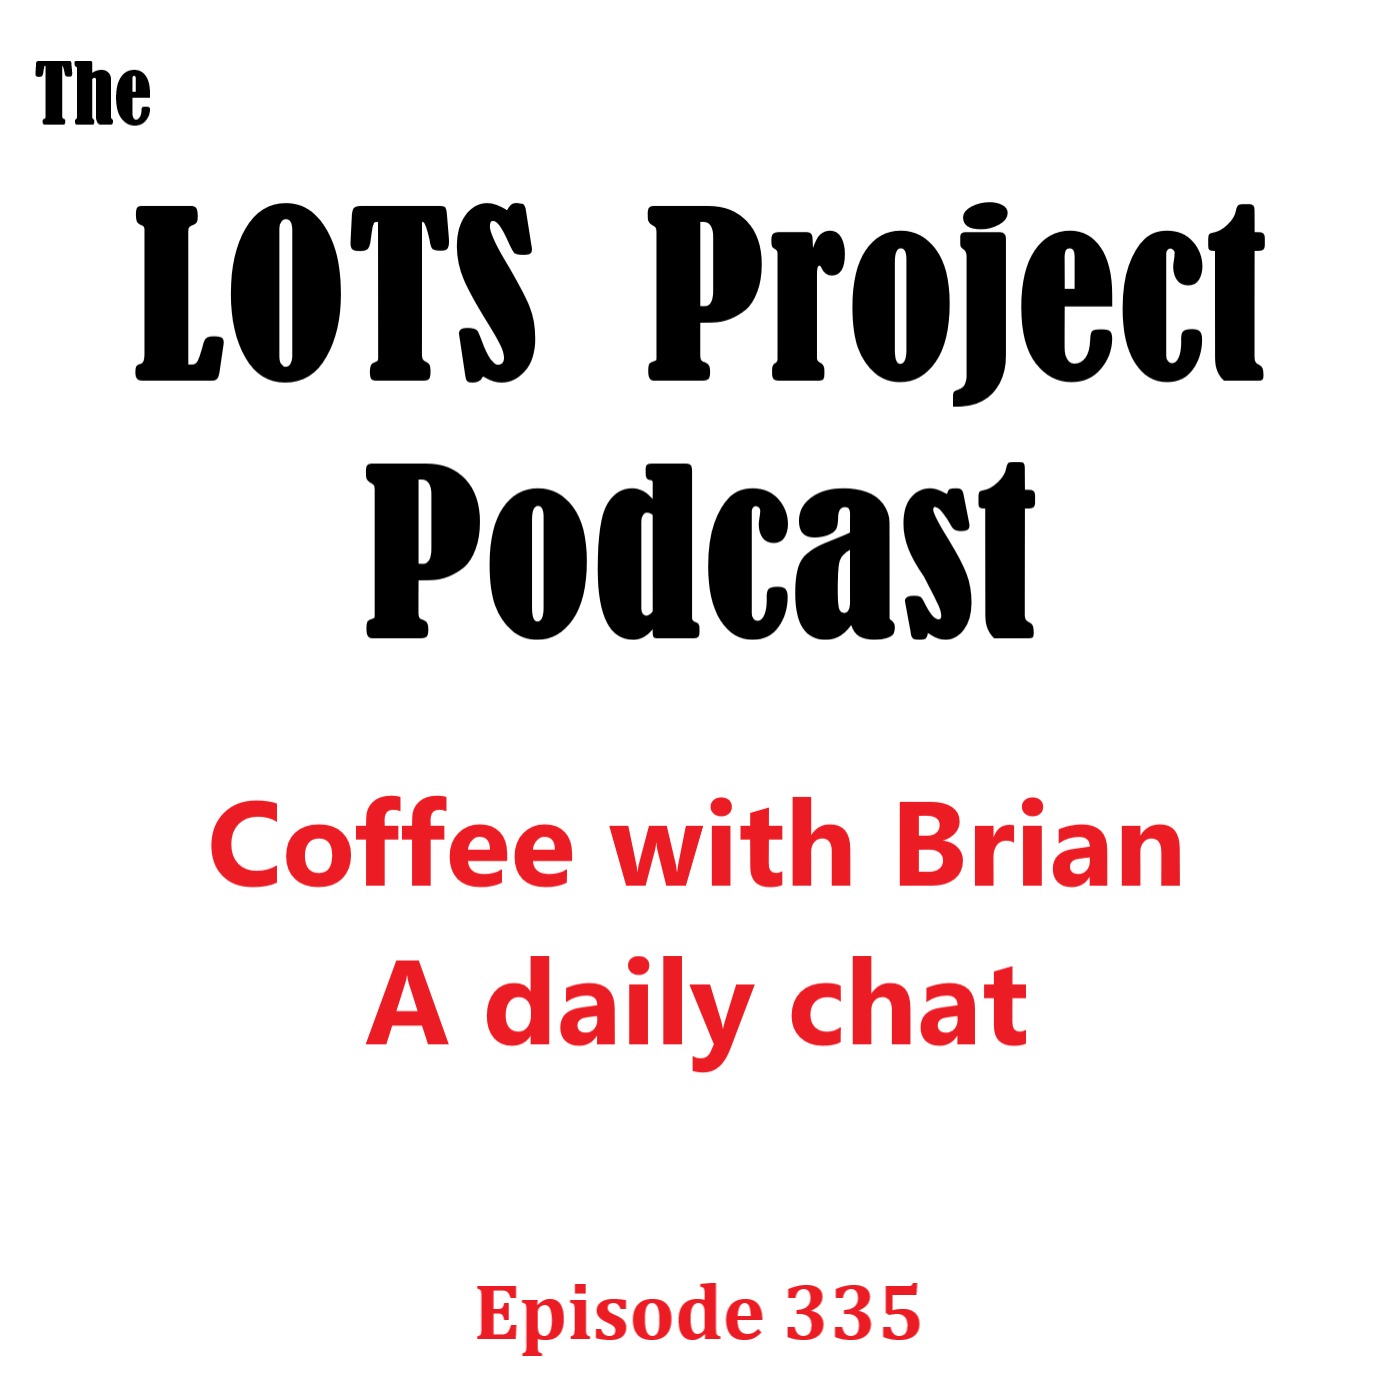 Episode 335 Coffee with Brian, A Daily Morning Chat #podcast #daily #nomad #coffee